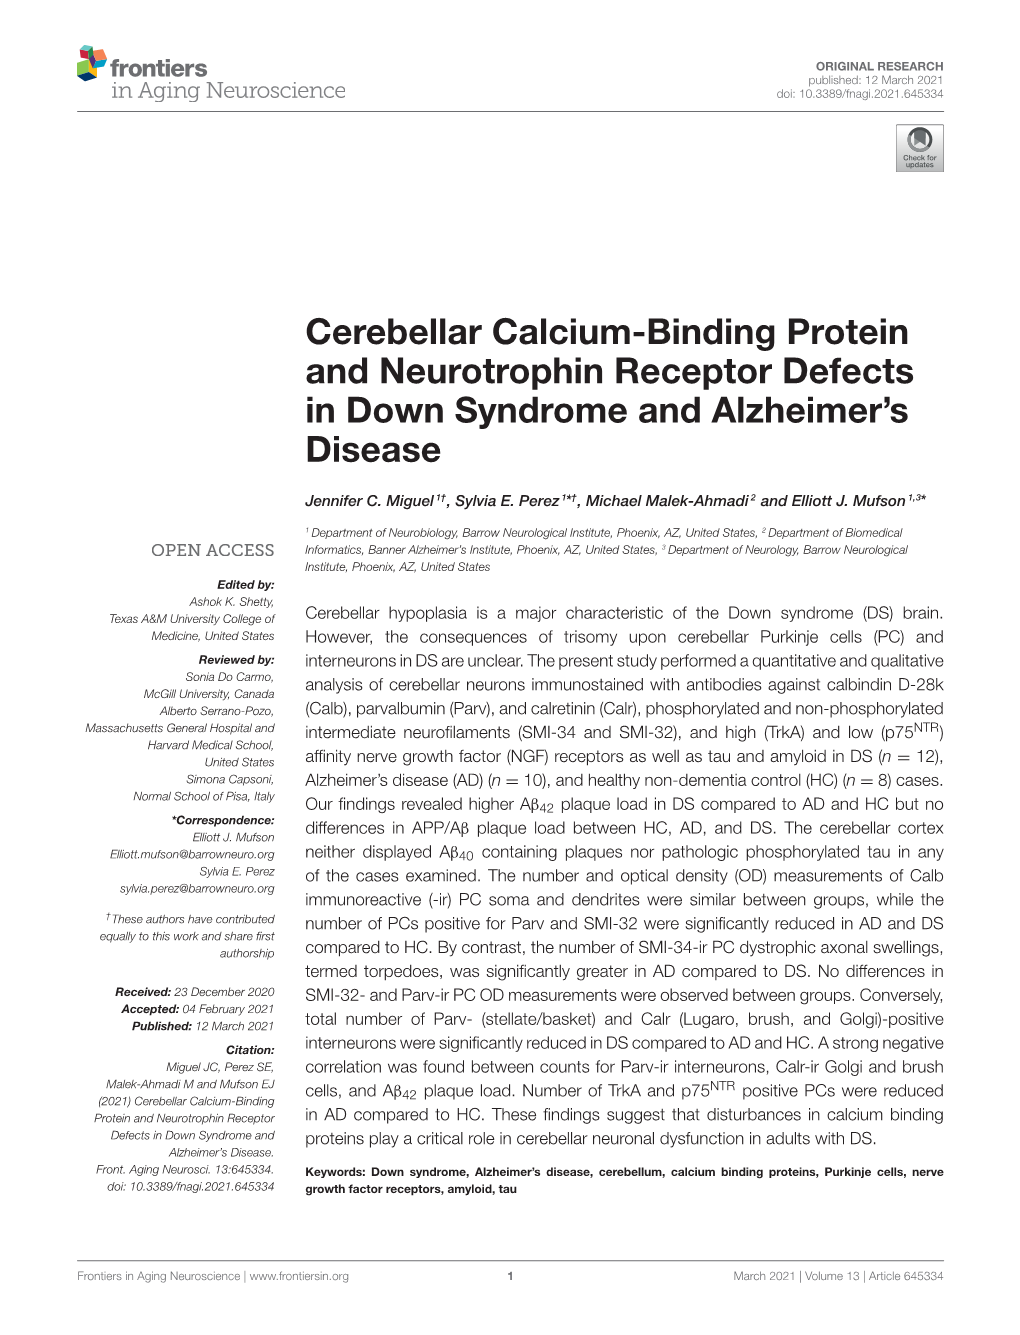 Cerebellar Calcium-Binding Protein and Neurotrophin Receptor Defects in Down Syndrome and Alzheimer’S Disease